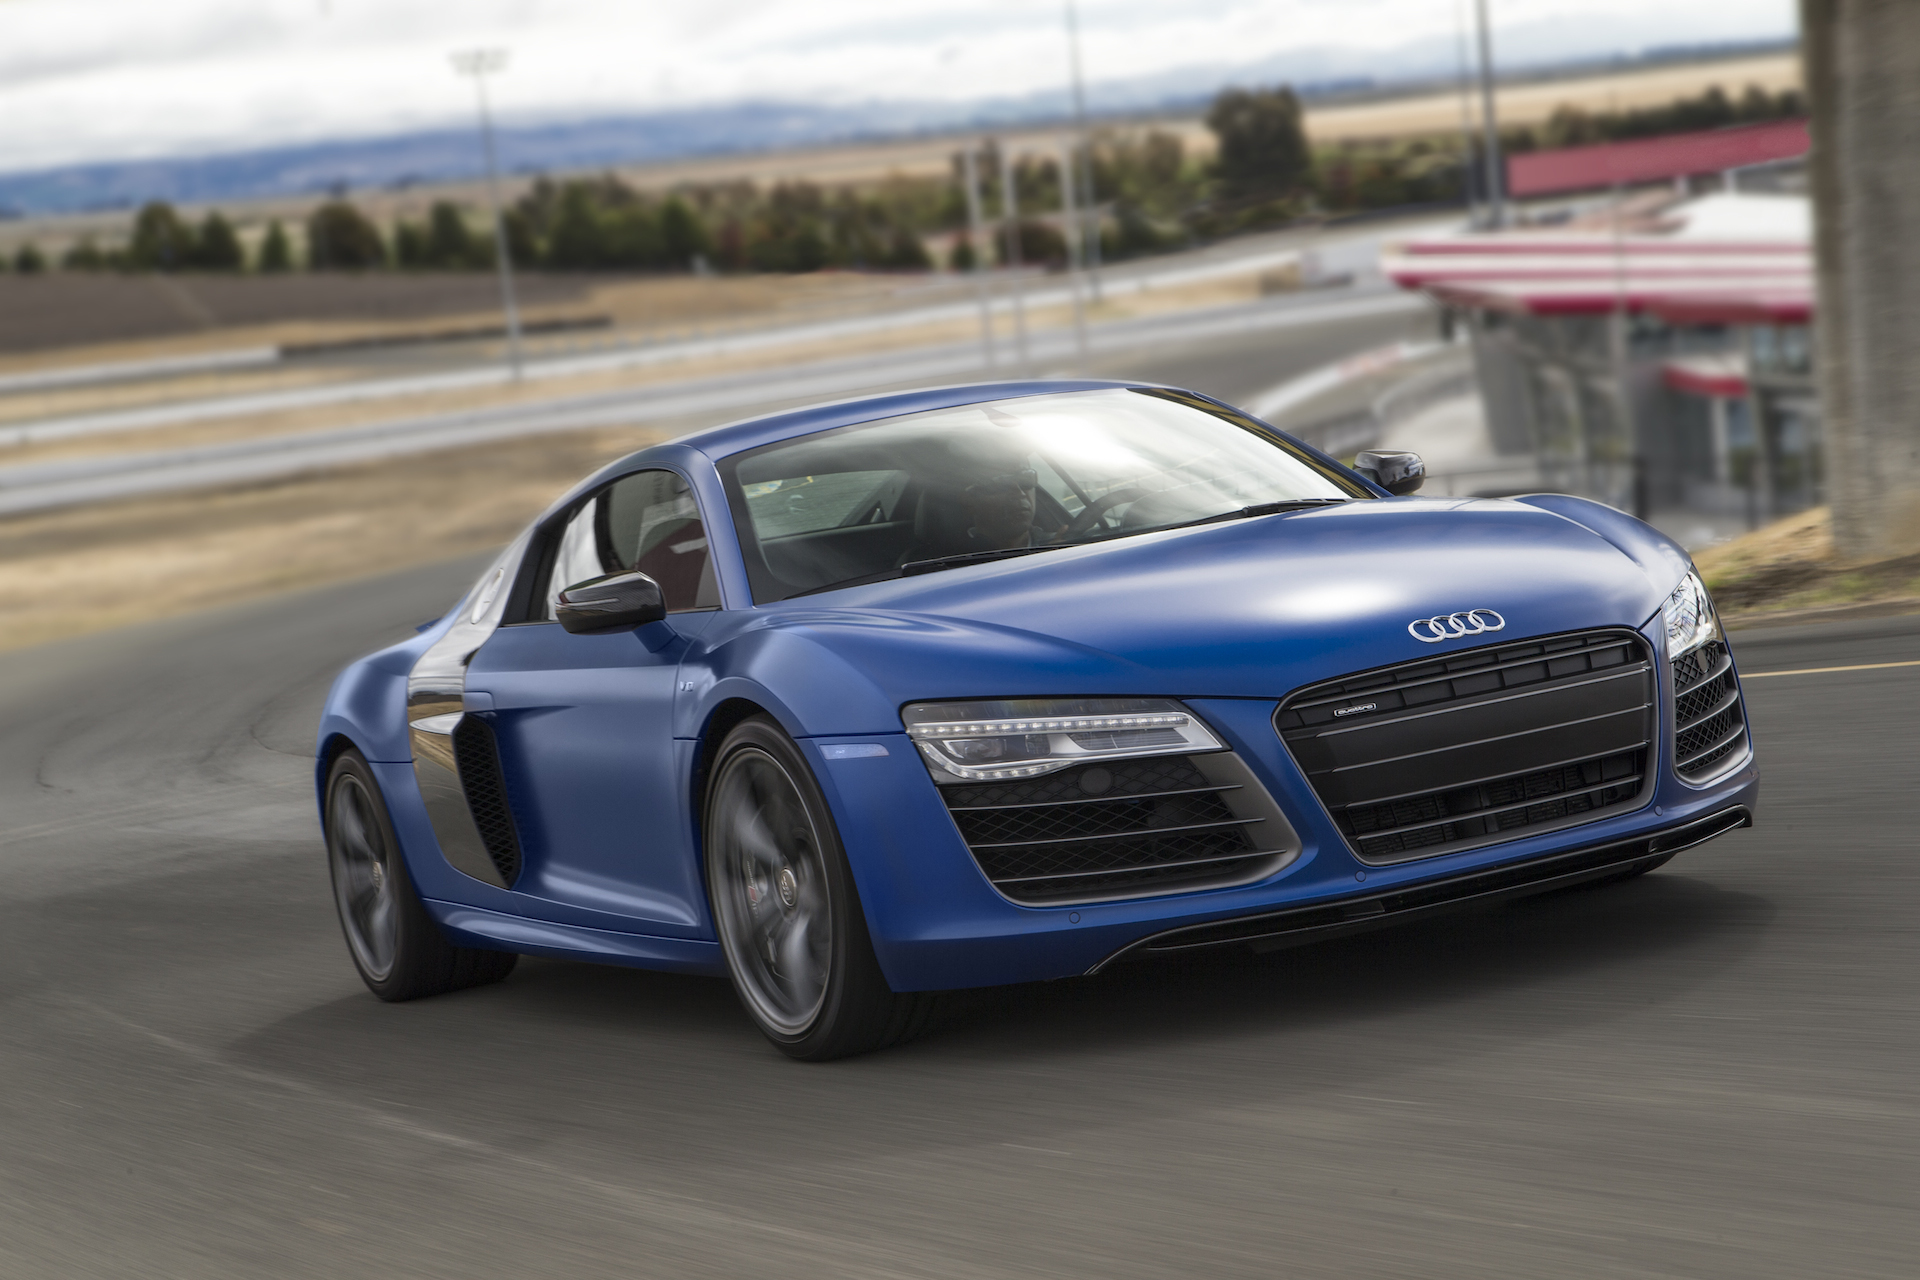 2015 Audi R8 Review, Ratings, Specs, Prices, and Photos - The Car Connection